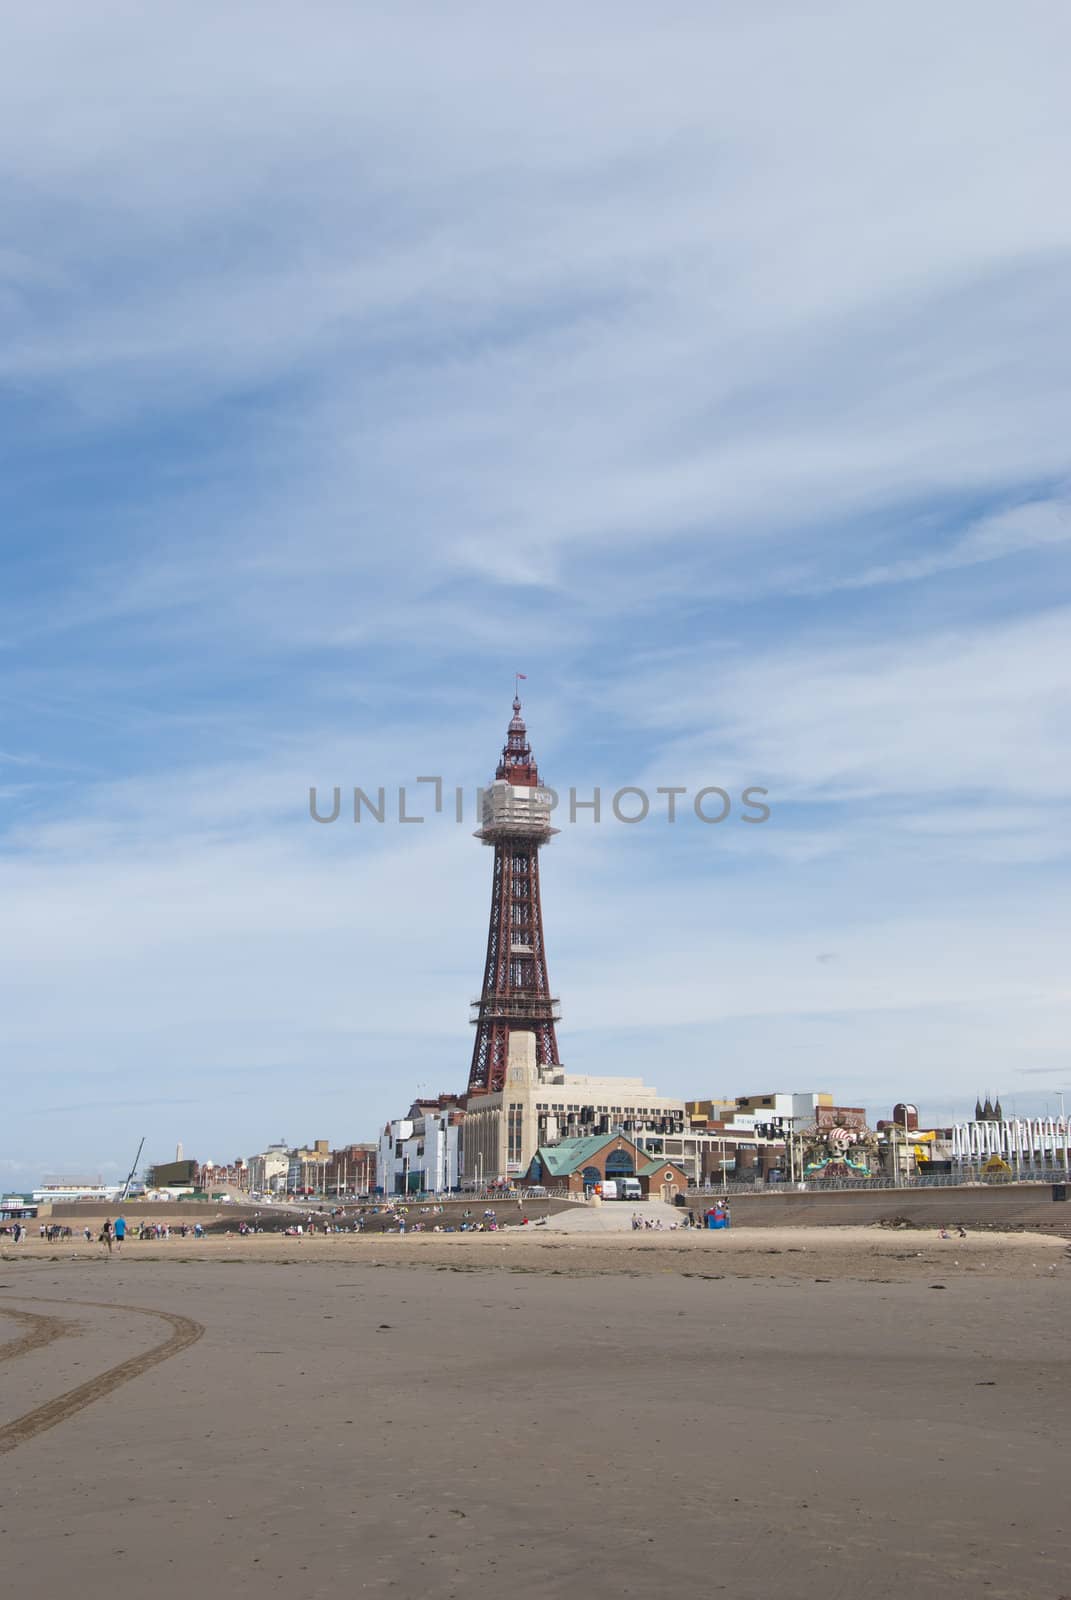 Blackpool Tower from the beach by d40xboy